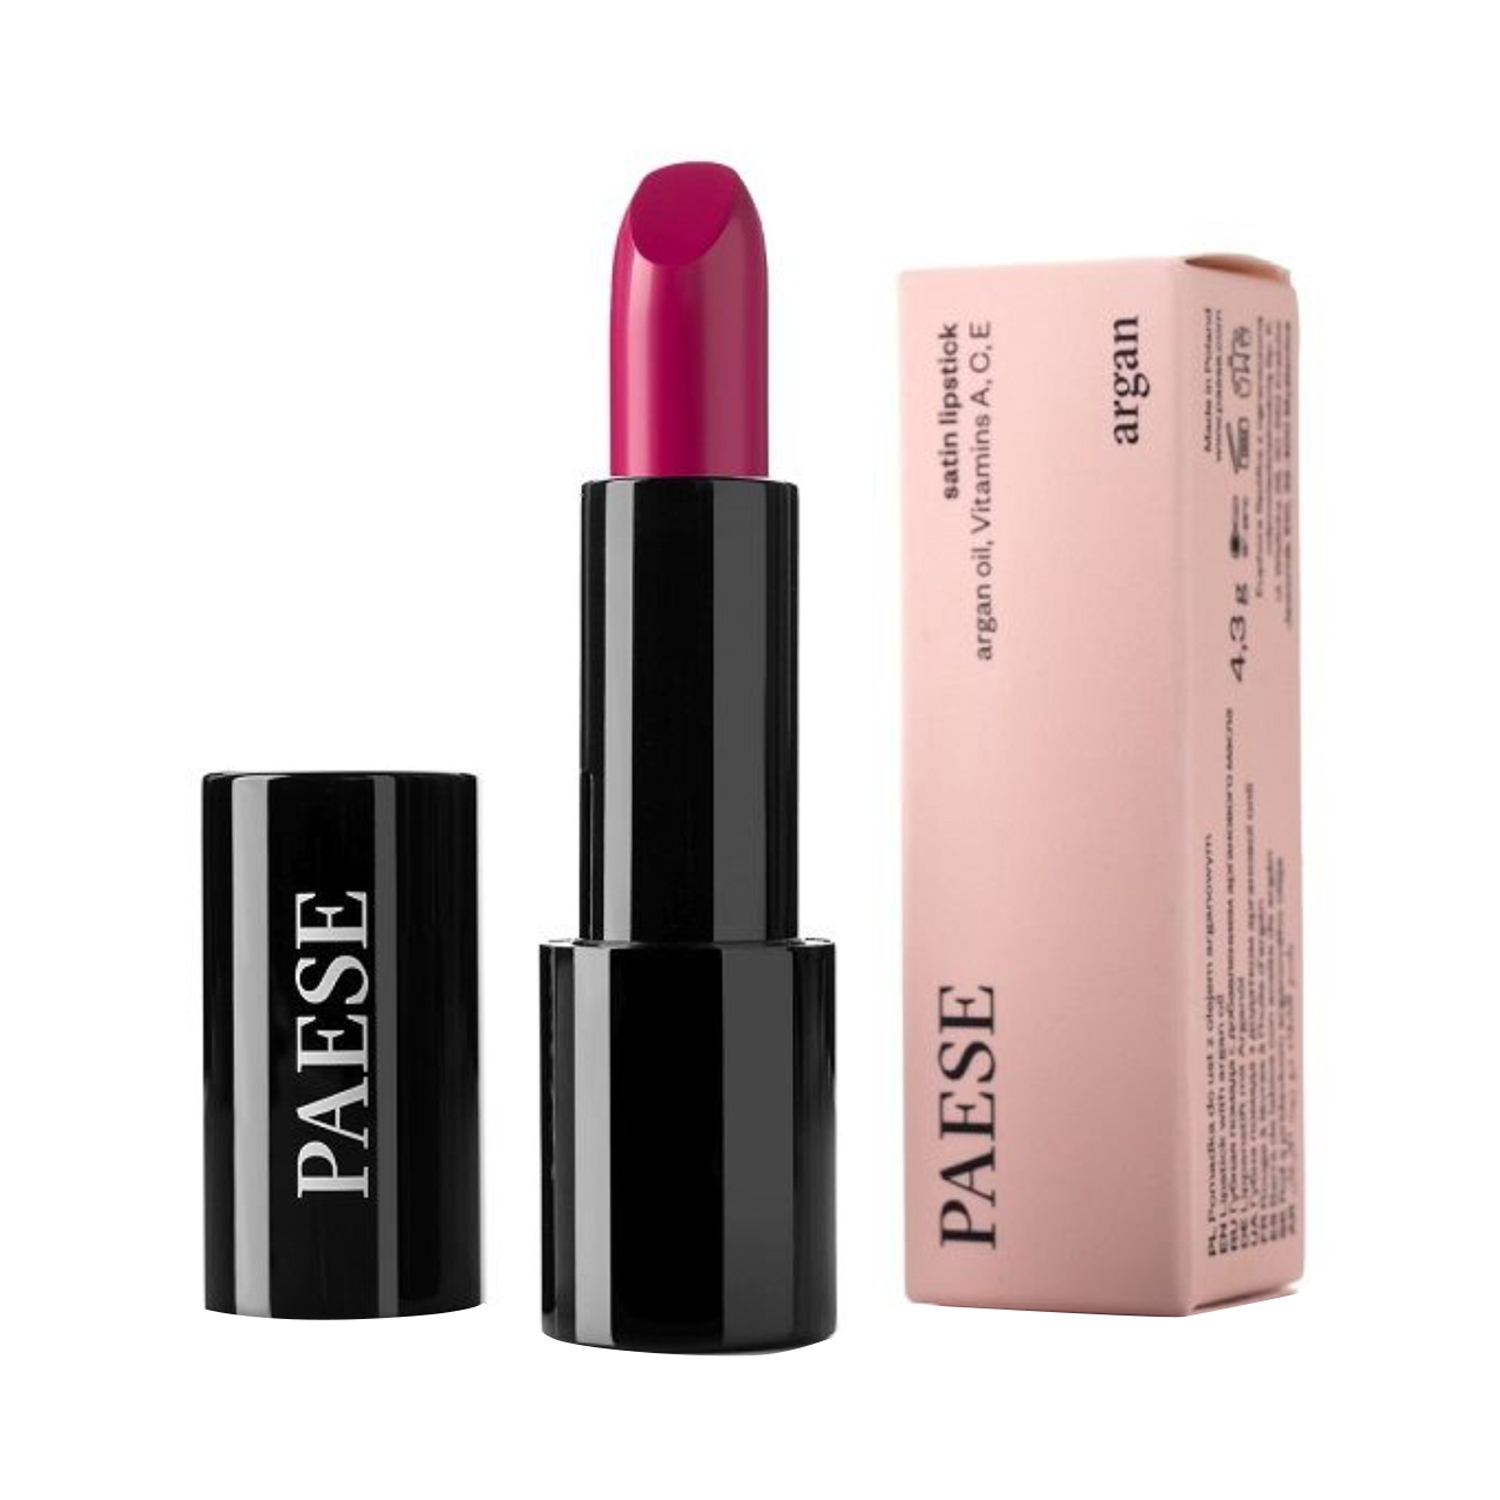 Paese Cosmetics | Paese Cosmetics Lipstick with Argan Oil - 80 Pink (4.3g)